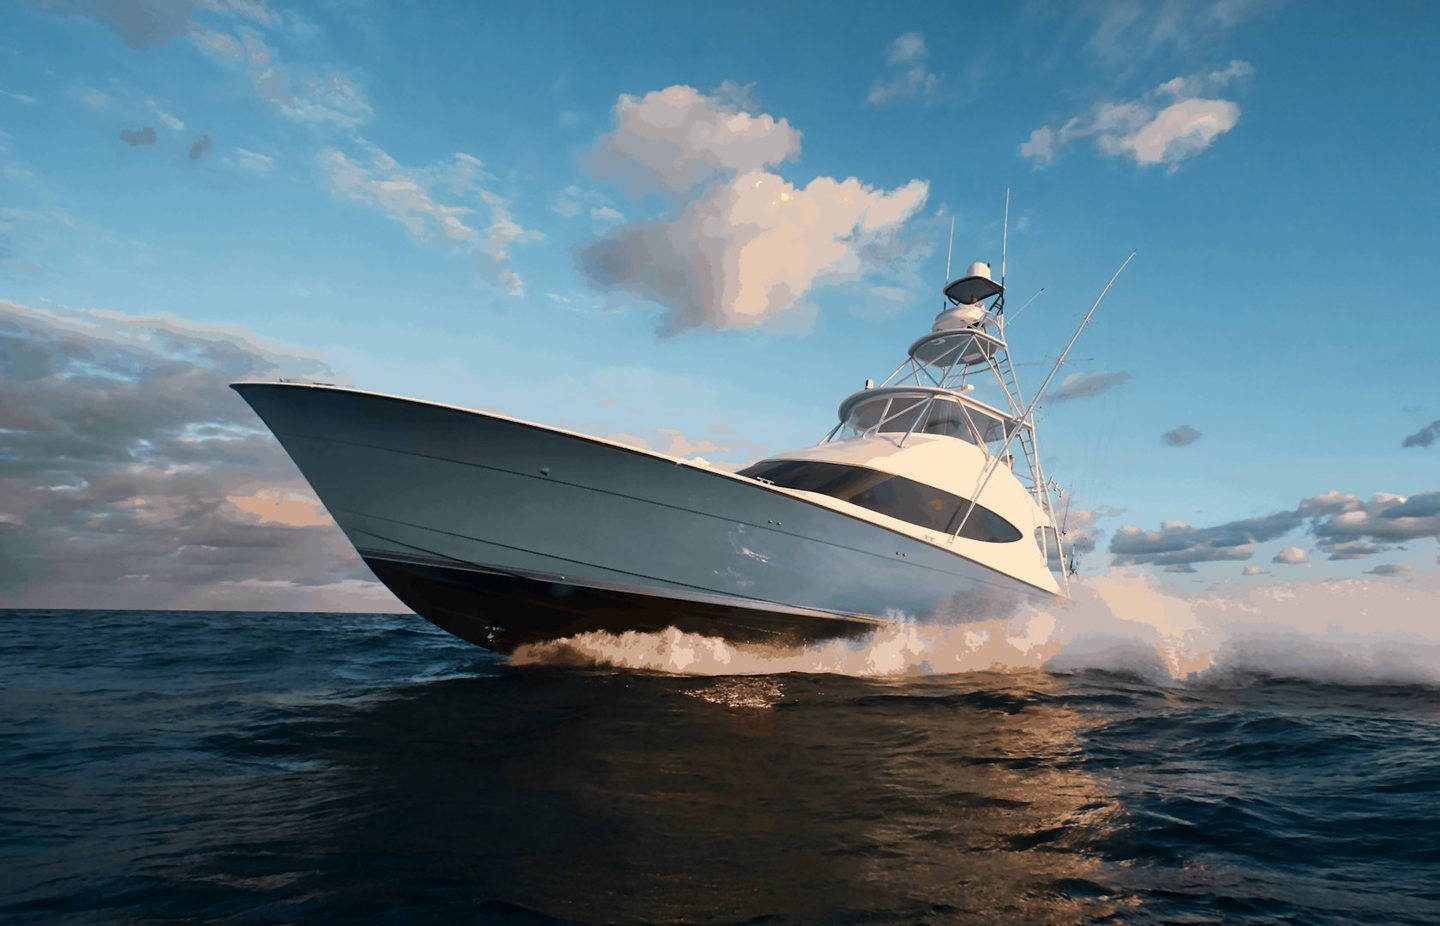 360 VR Virtual Tours of the Hatteras GT59